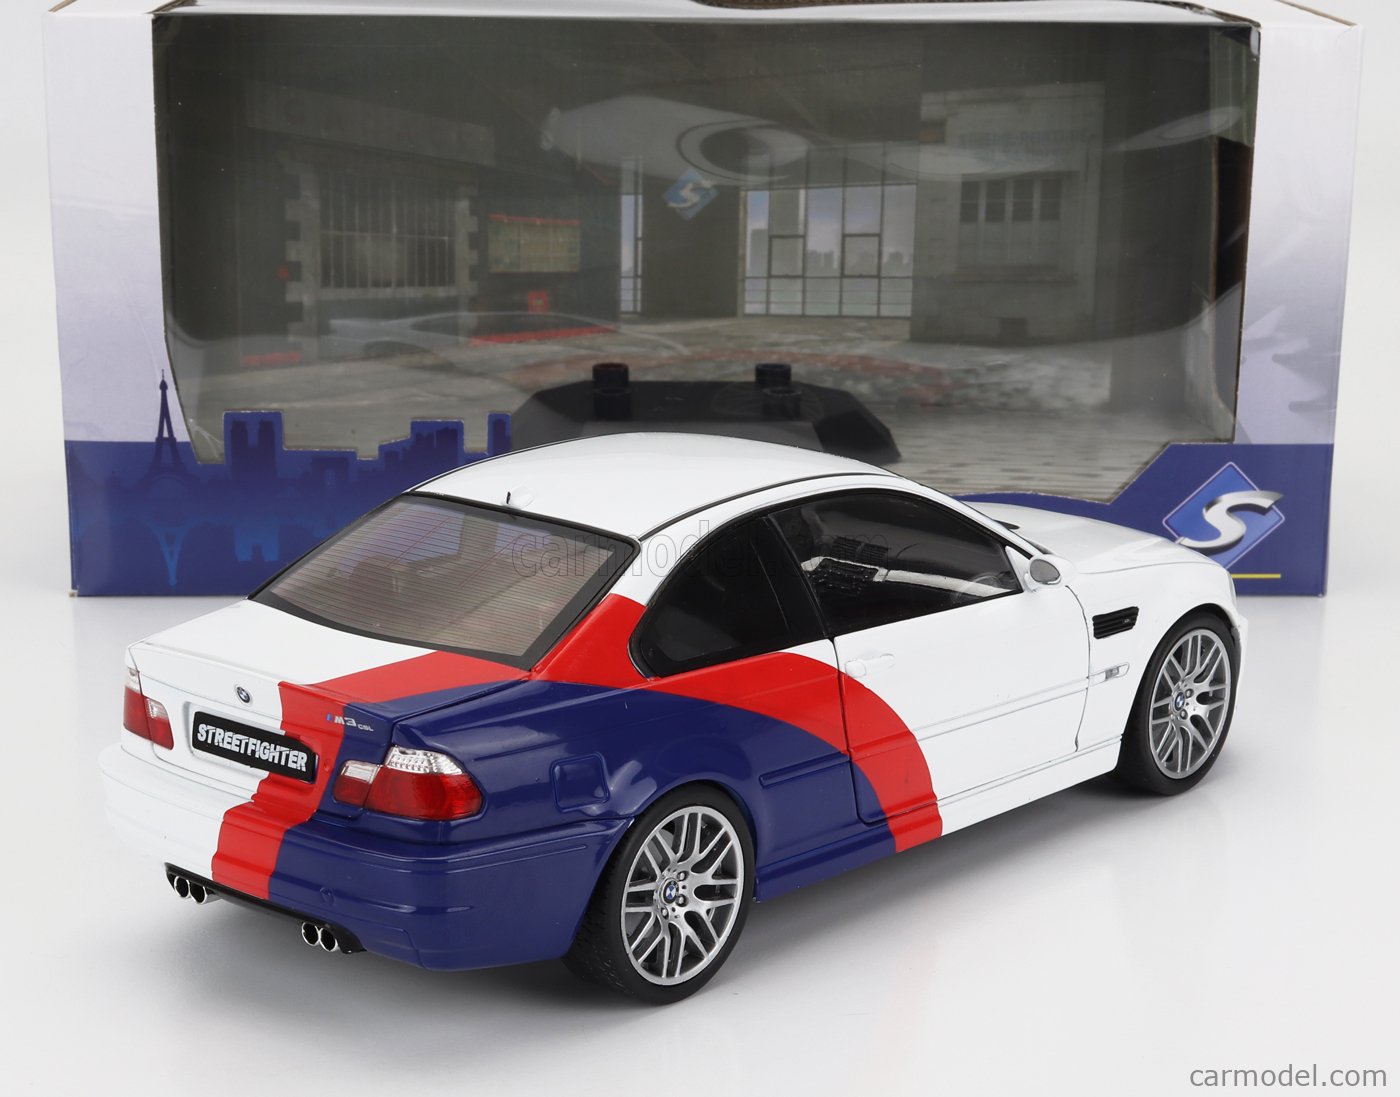 BMW - 3-SERIES M3 (E46) COUPE STREETFIGHTER 2003